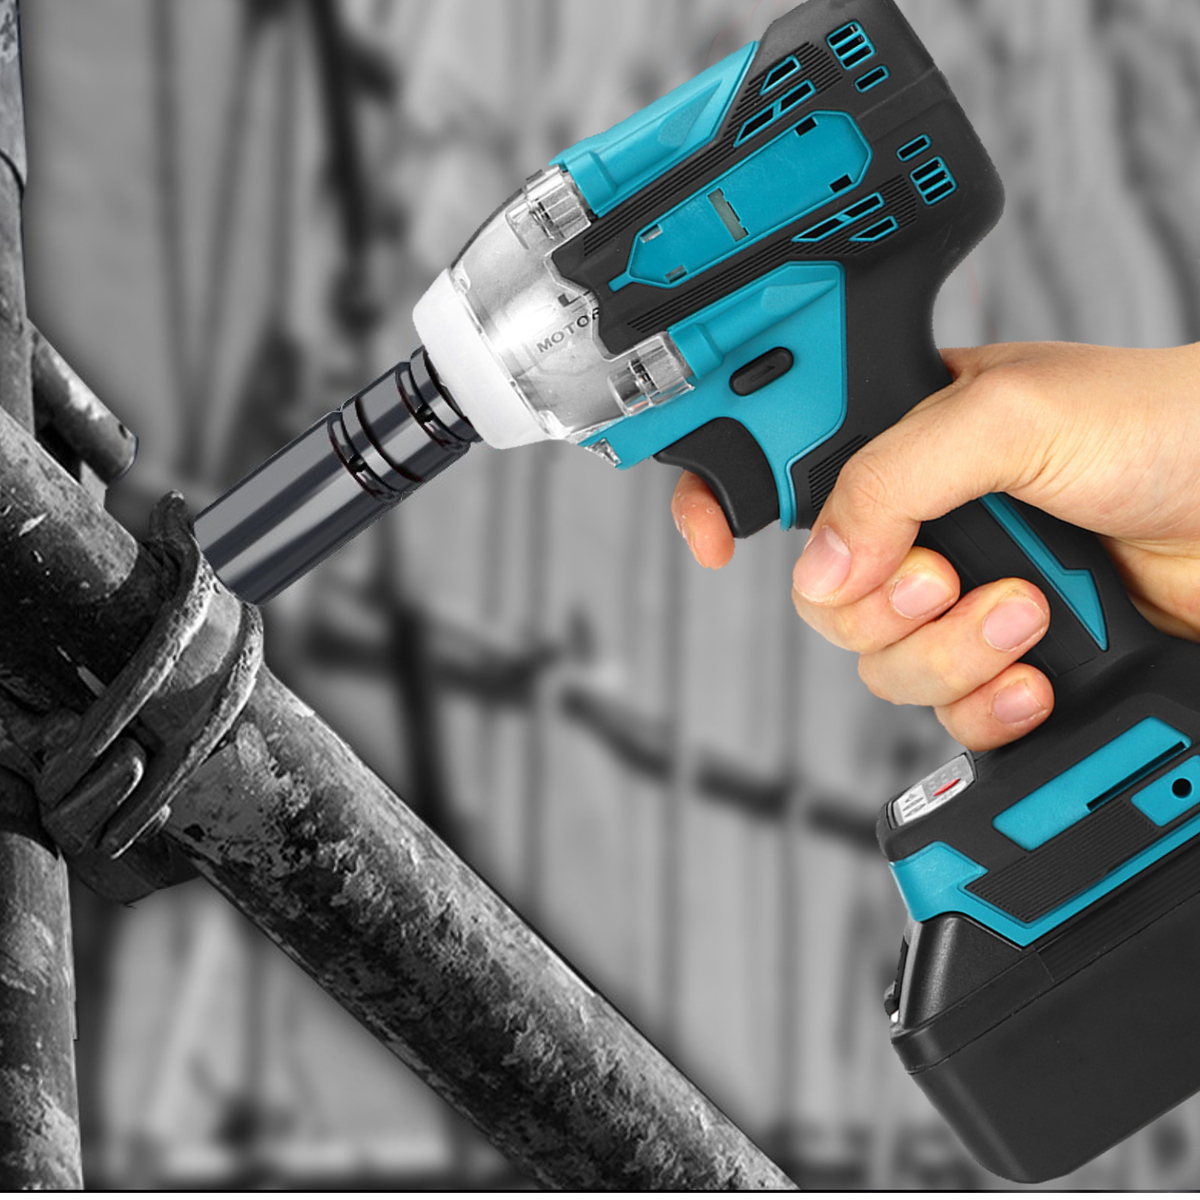 Drillpro-2-in1-18V-800Nm-Electric-Wrench-Screwdriver-Brushless-Cordless-Electric-12Wrench-14Screwdri-1806148-2